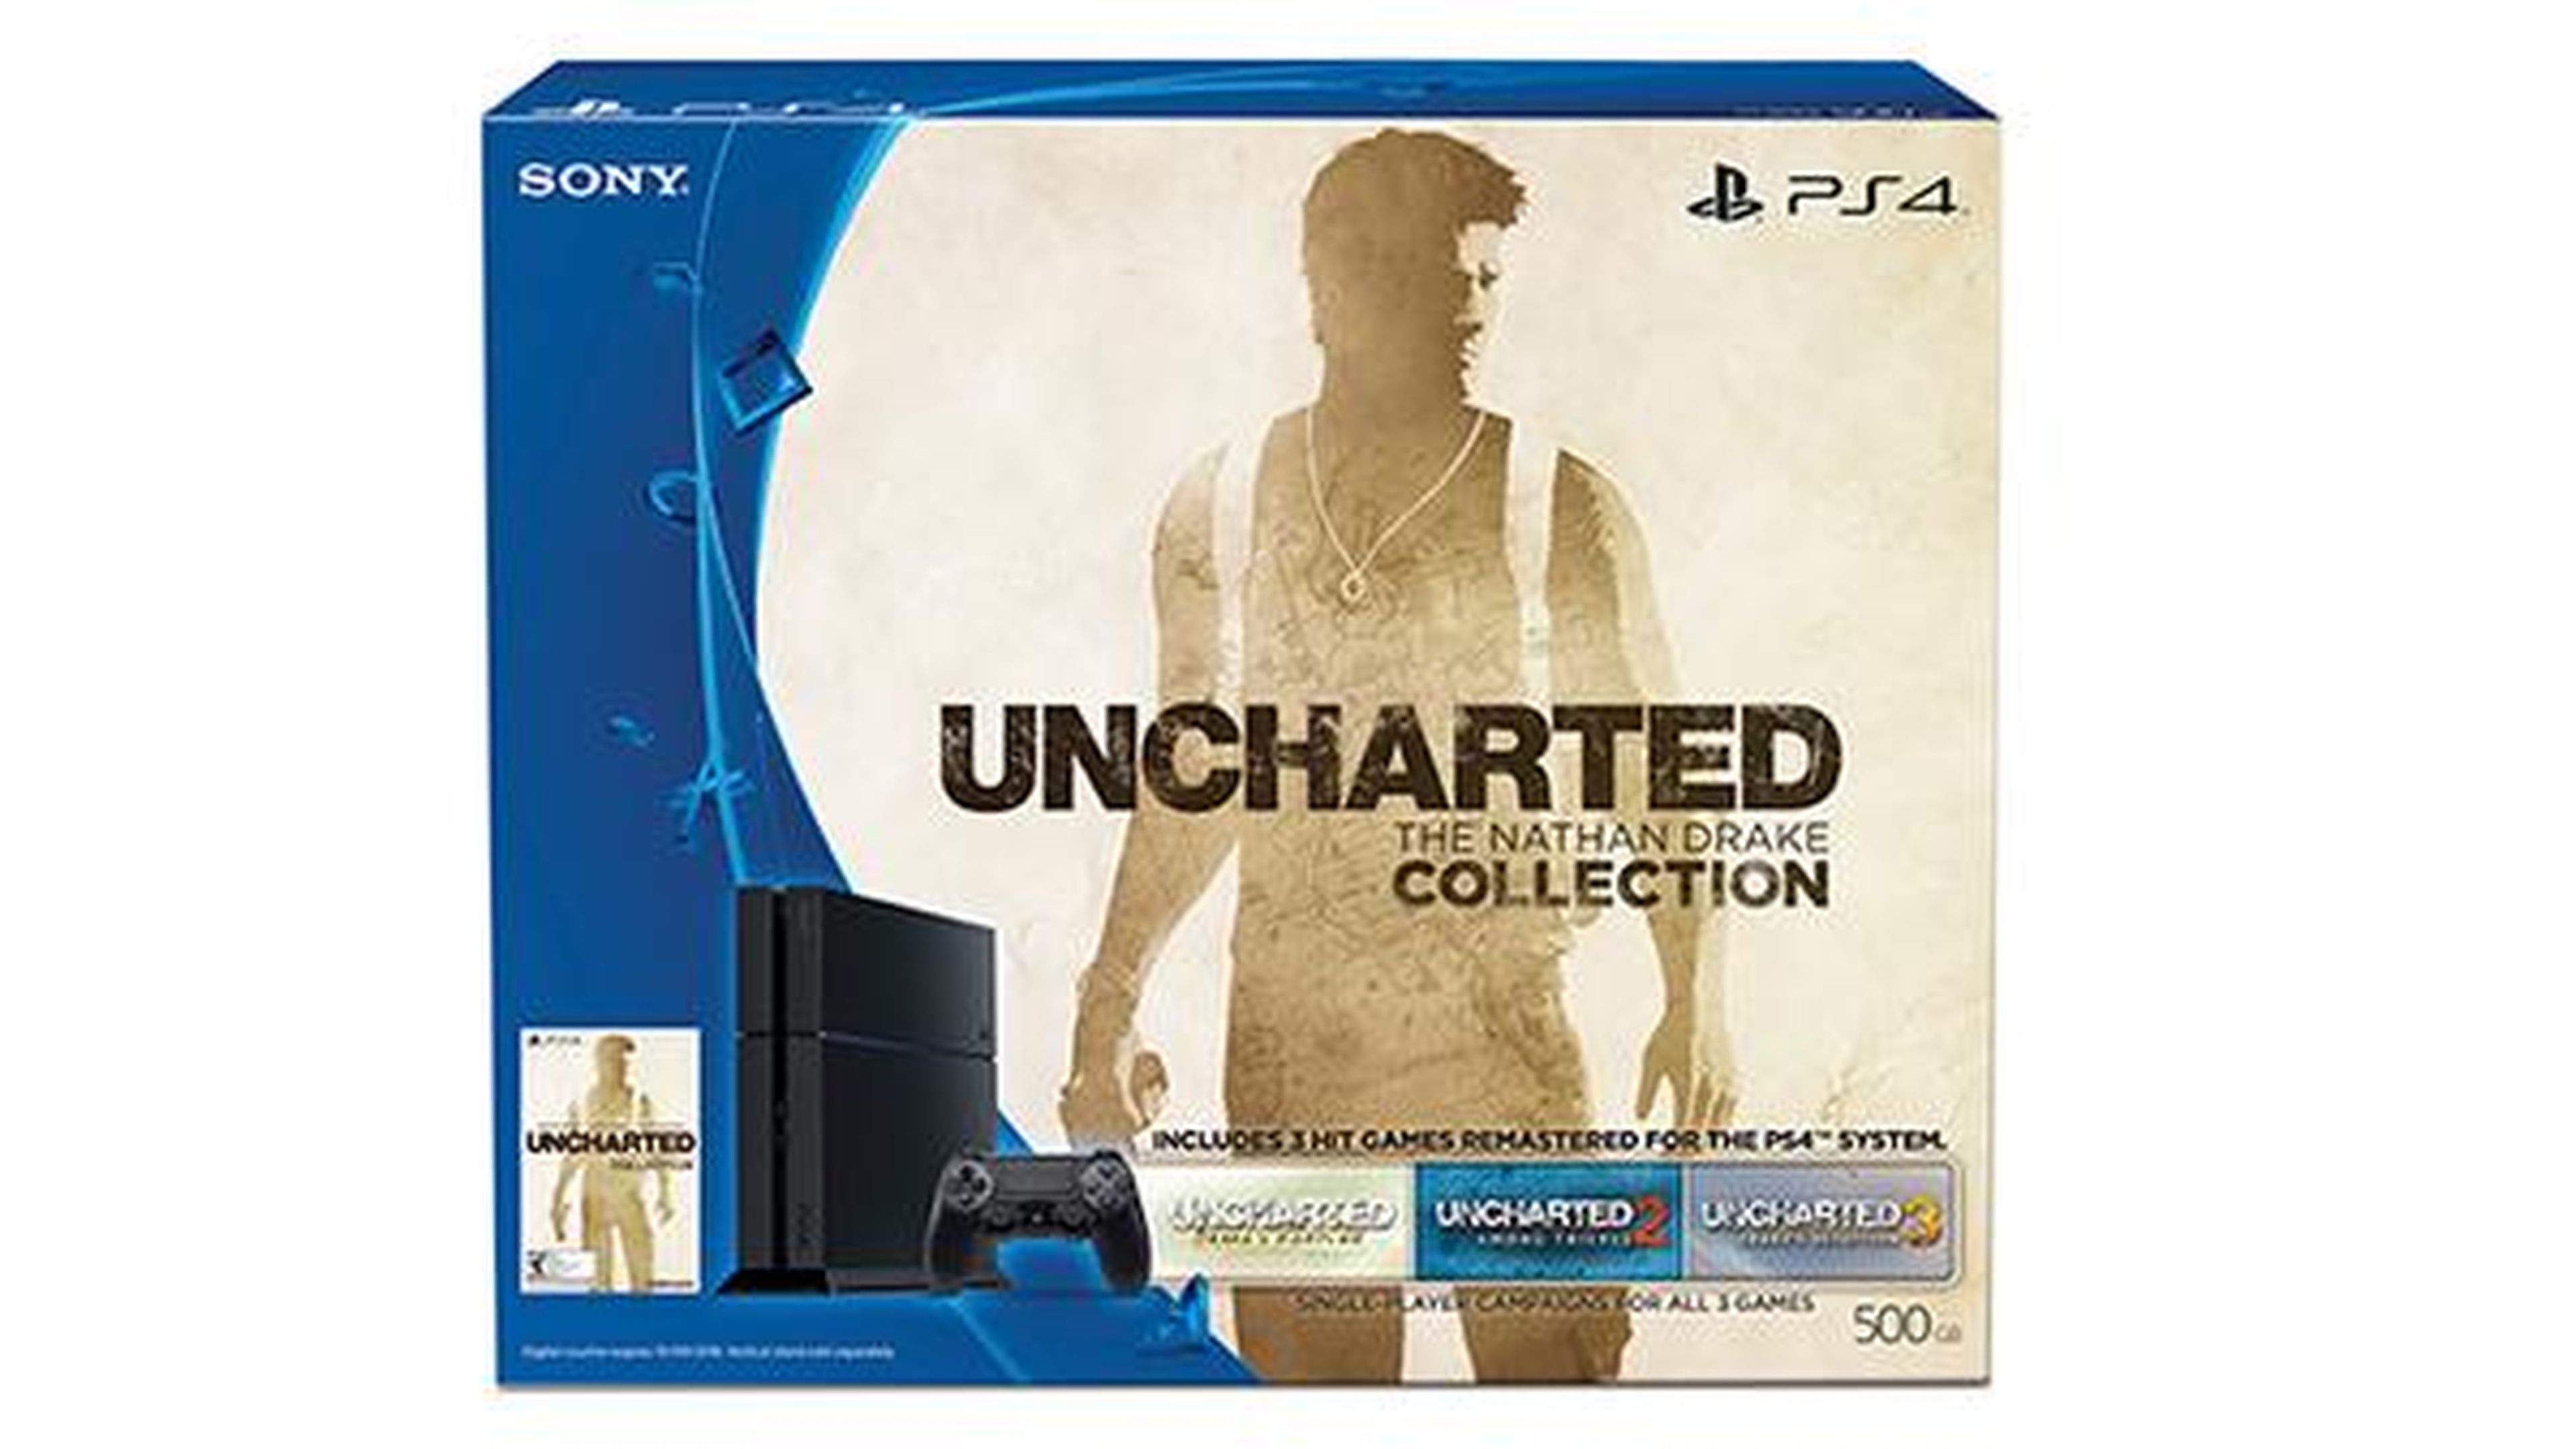 PS4 y Uncharted: The Nathan Drake Collection en un nuevo pack